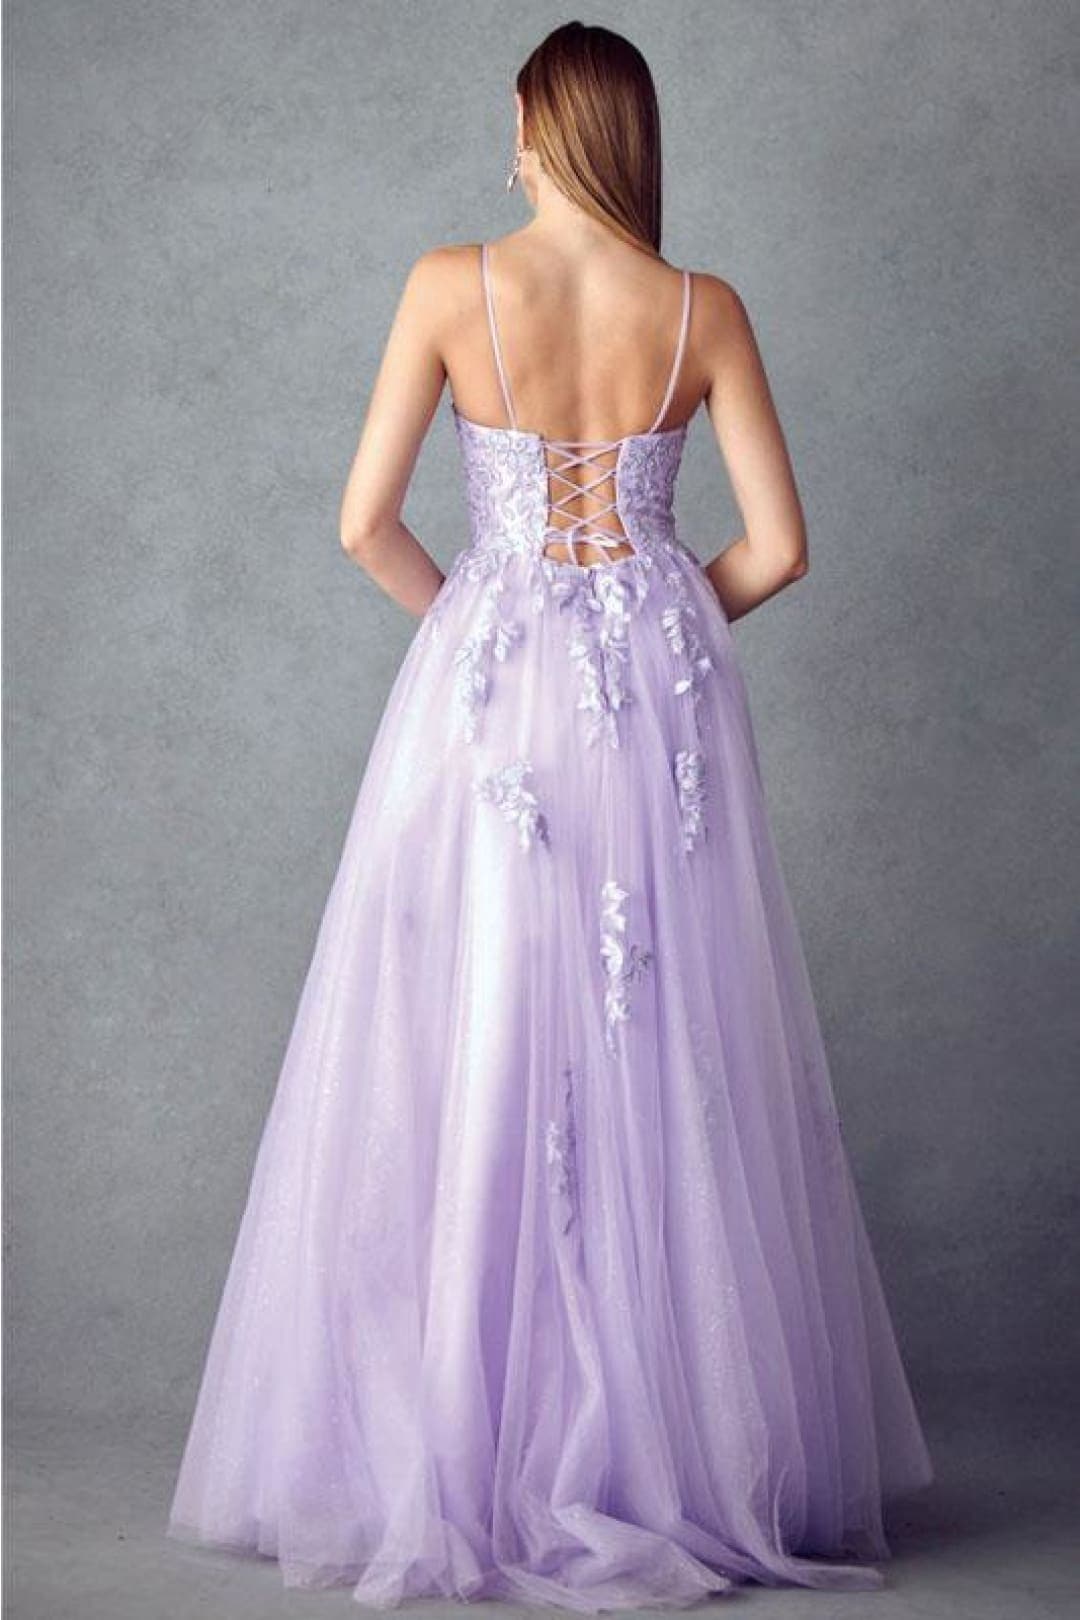 Prom formal A-line Evening Gown